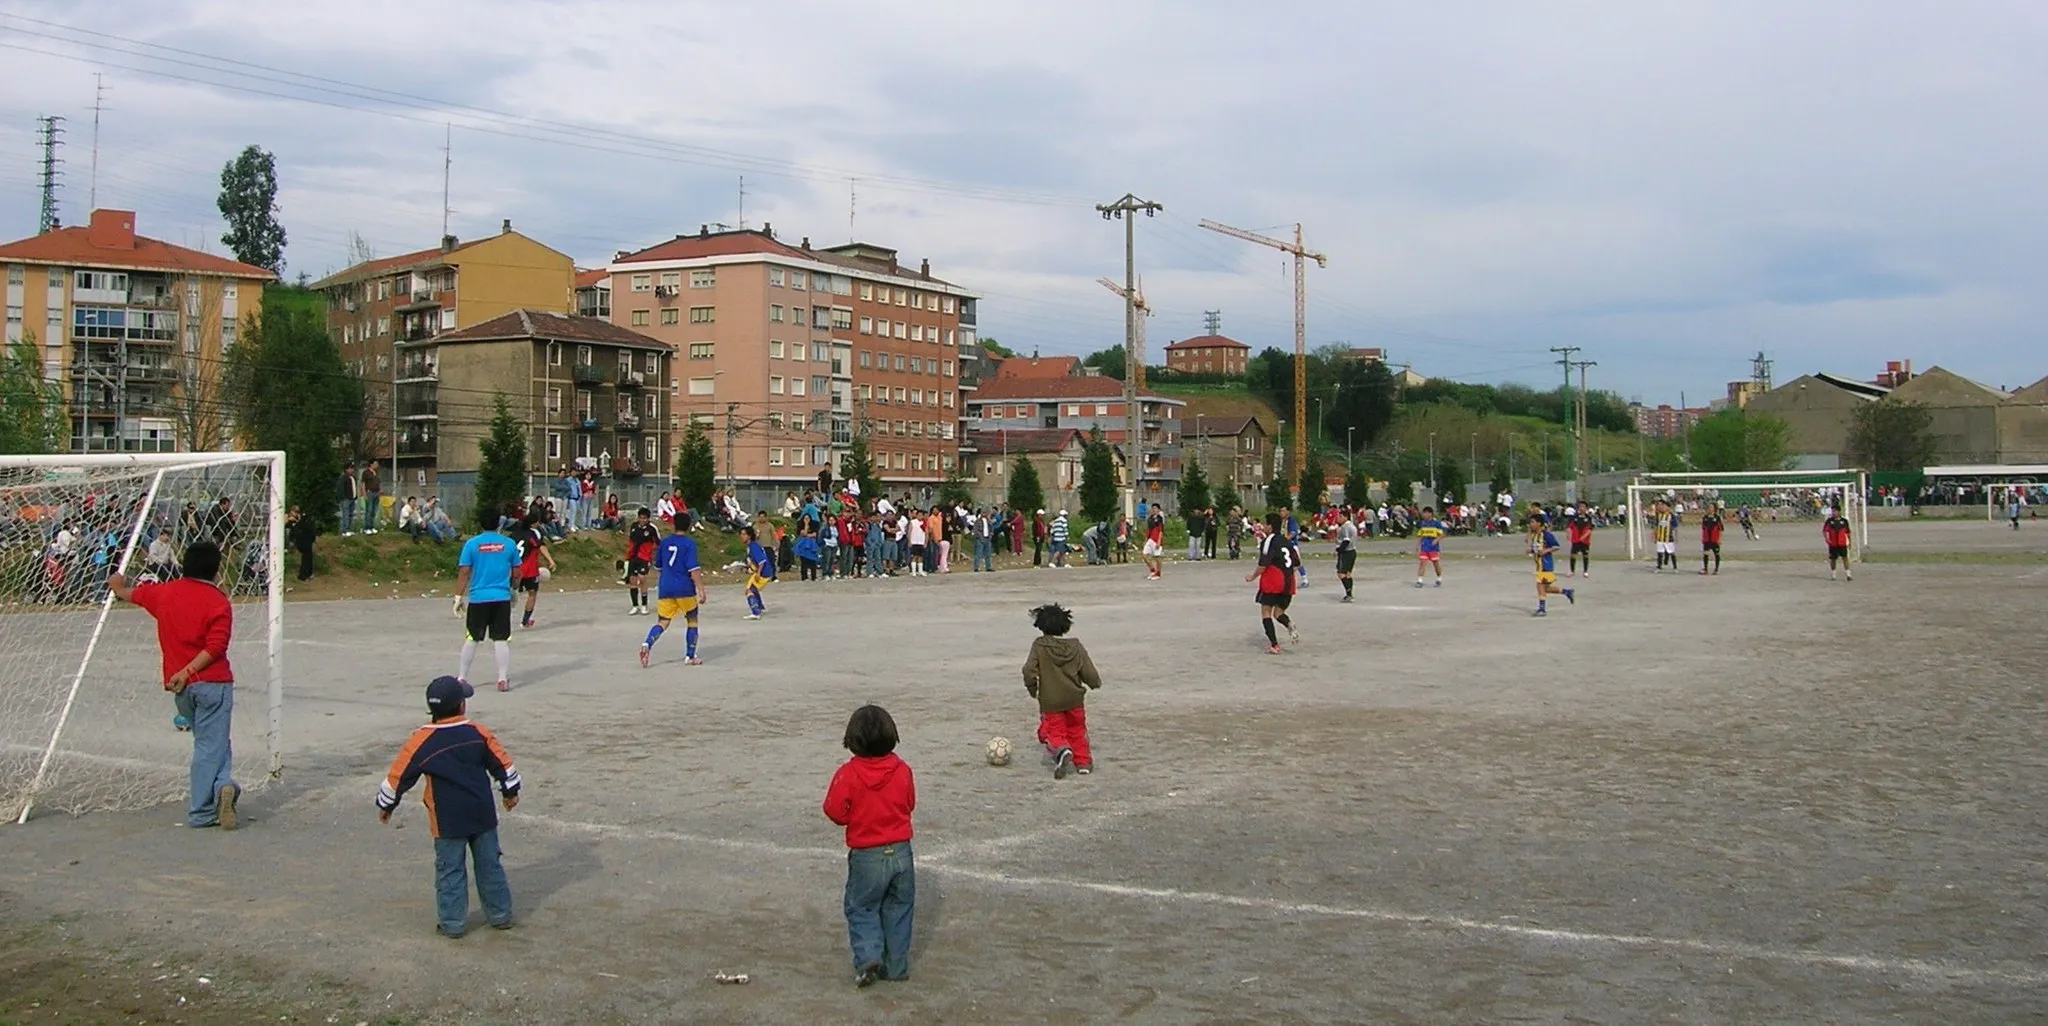 Photo showing: Soccer football match near La Chopera - Txopoeta, Lamiaco-Lamiako, Lejona-Leioa, Biscay. Lamiaco fields were the first placed where the British played football against the Biscayne in the XIX century, thus being one of the first places to hold football matches in Spain. Currently there still are football fileds in the neighbourhood, visited by crowds every weekend.